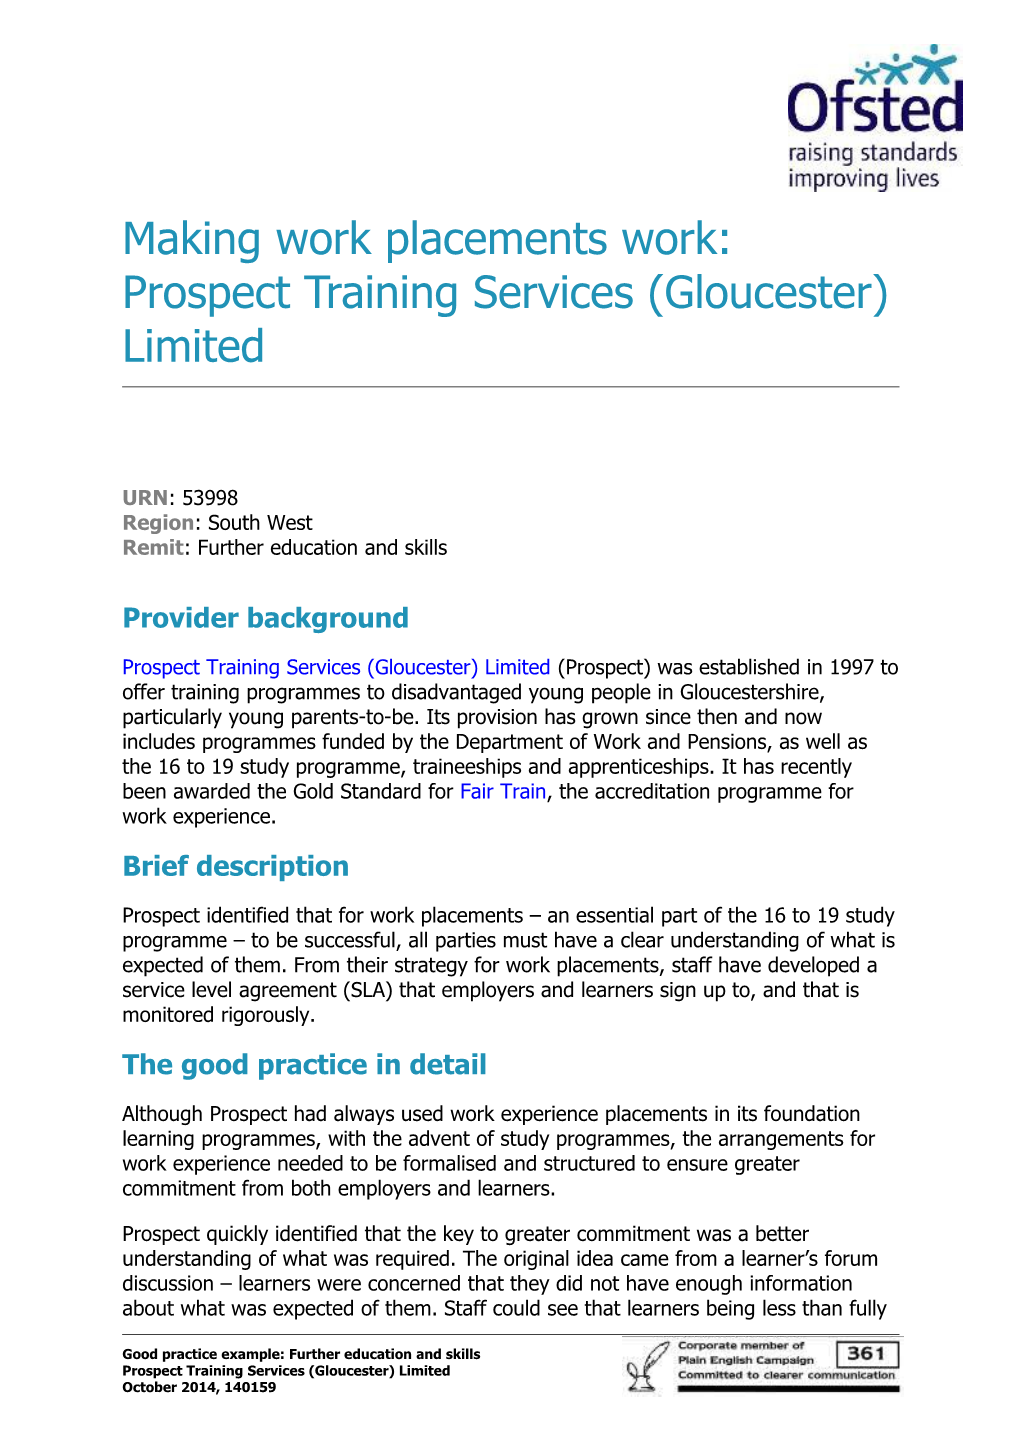 Making Work Placements Work: Prospect Training Services (Gloucester) Limited